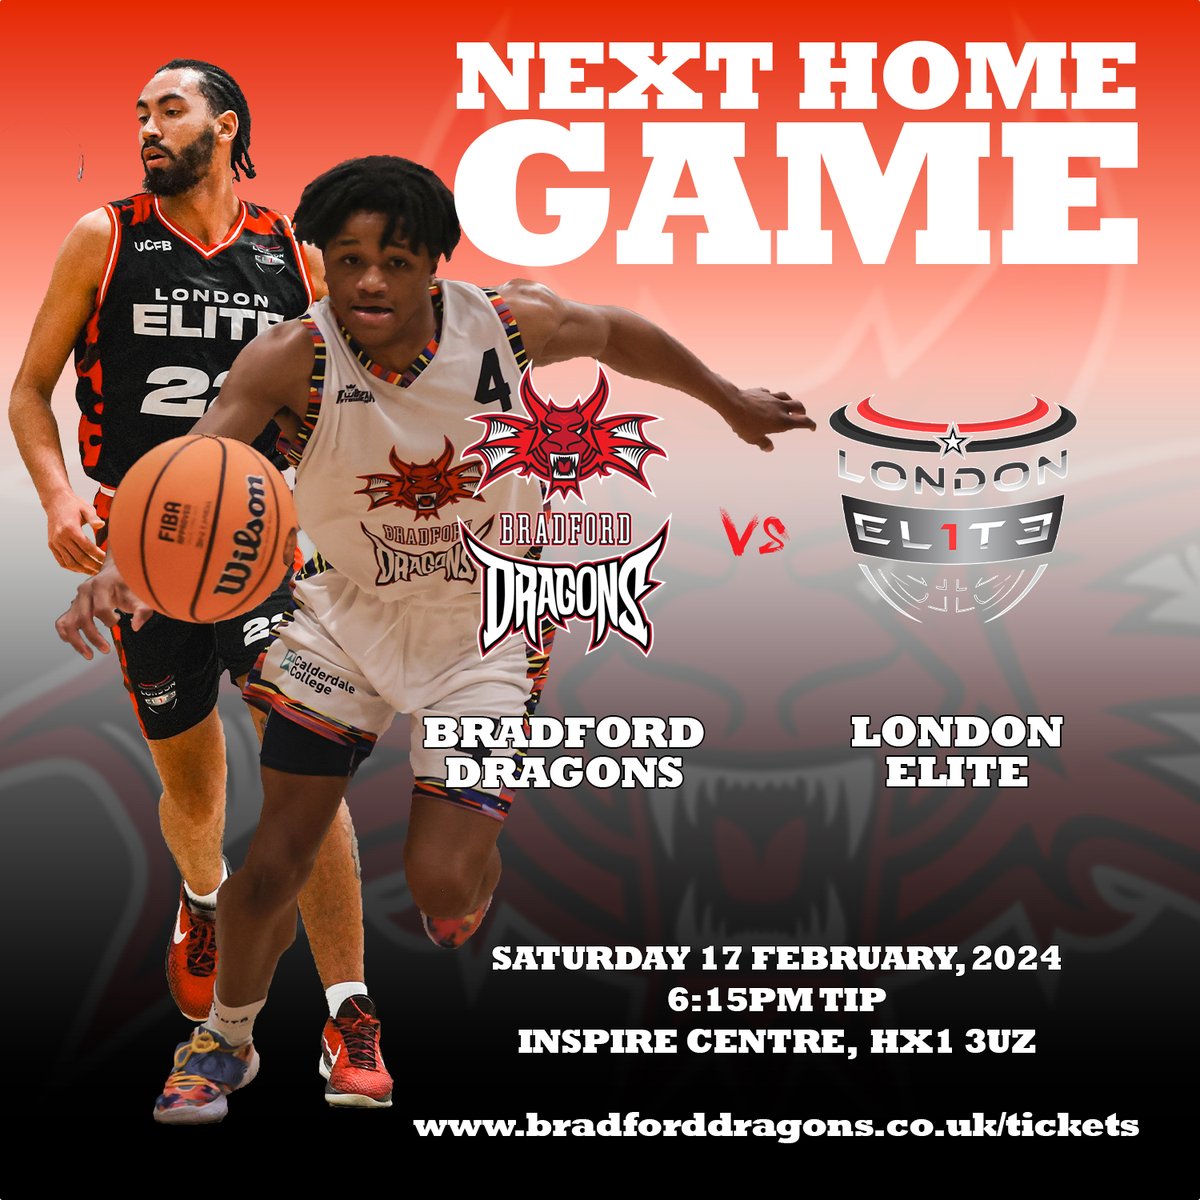 Don't forget to book your tickets for our next home fixture, against London Elite on Saturday 17th February. Make sure you book early to save money. #BradfordDragons #Basketball #OneClubOneFamily #nbl2324 #earlybird